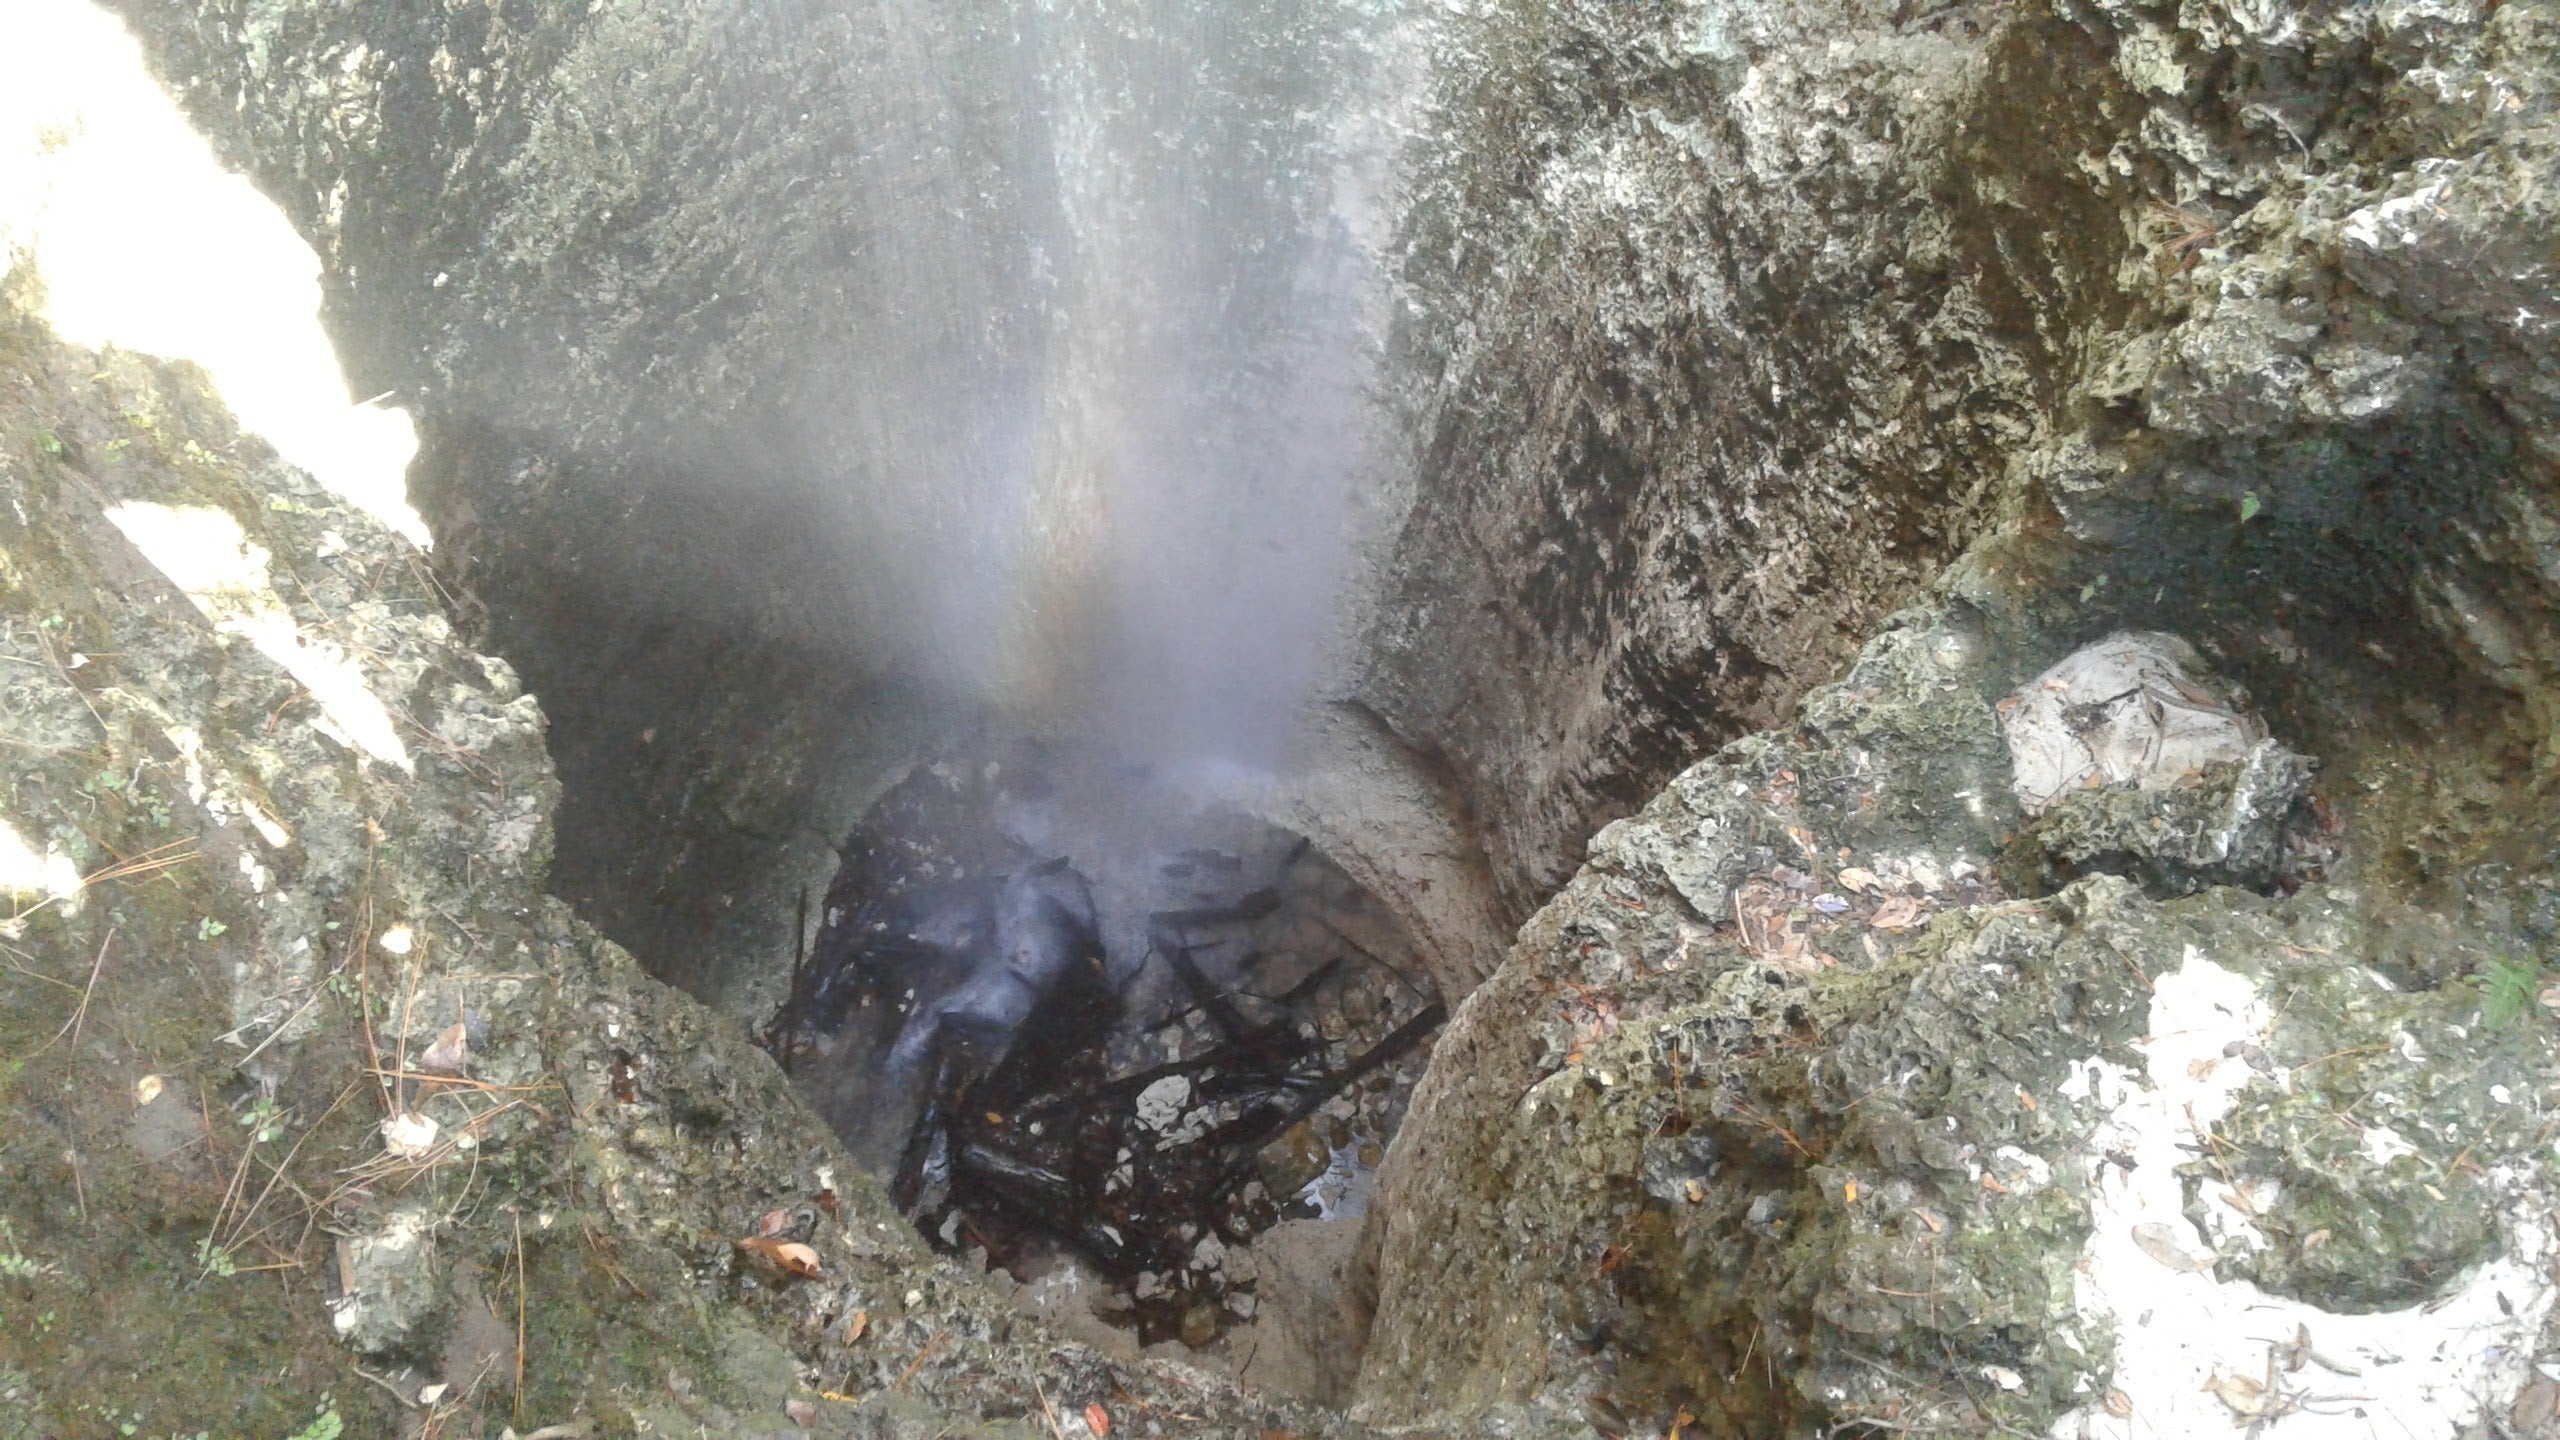 Looking down into sinkhole